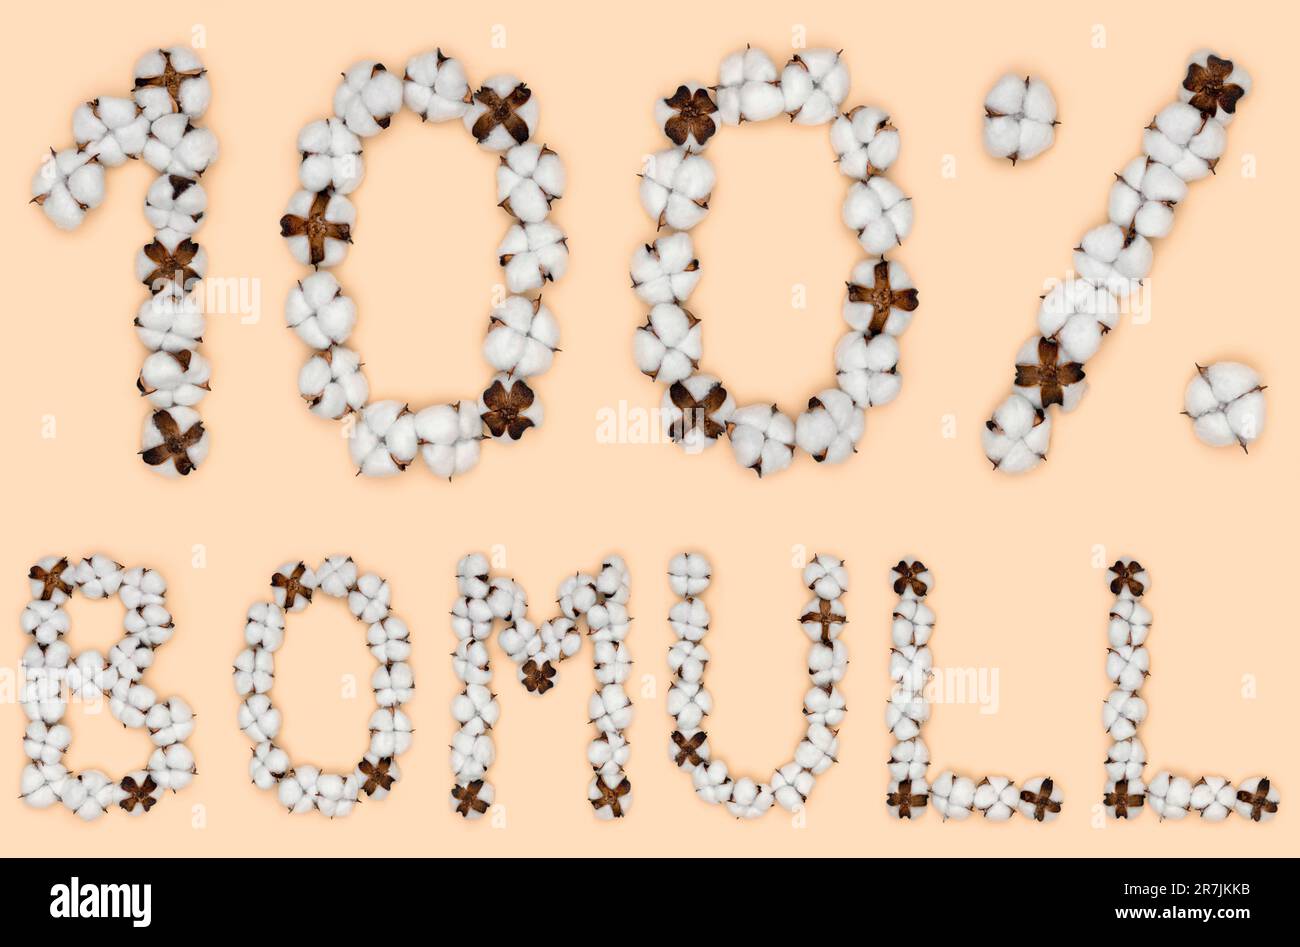 Lettering 100% Bomull from Norwegian or Swedish language means cotton, made  of cotton flowers. Concept of organic raw material Stock Photo - Alamy